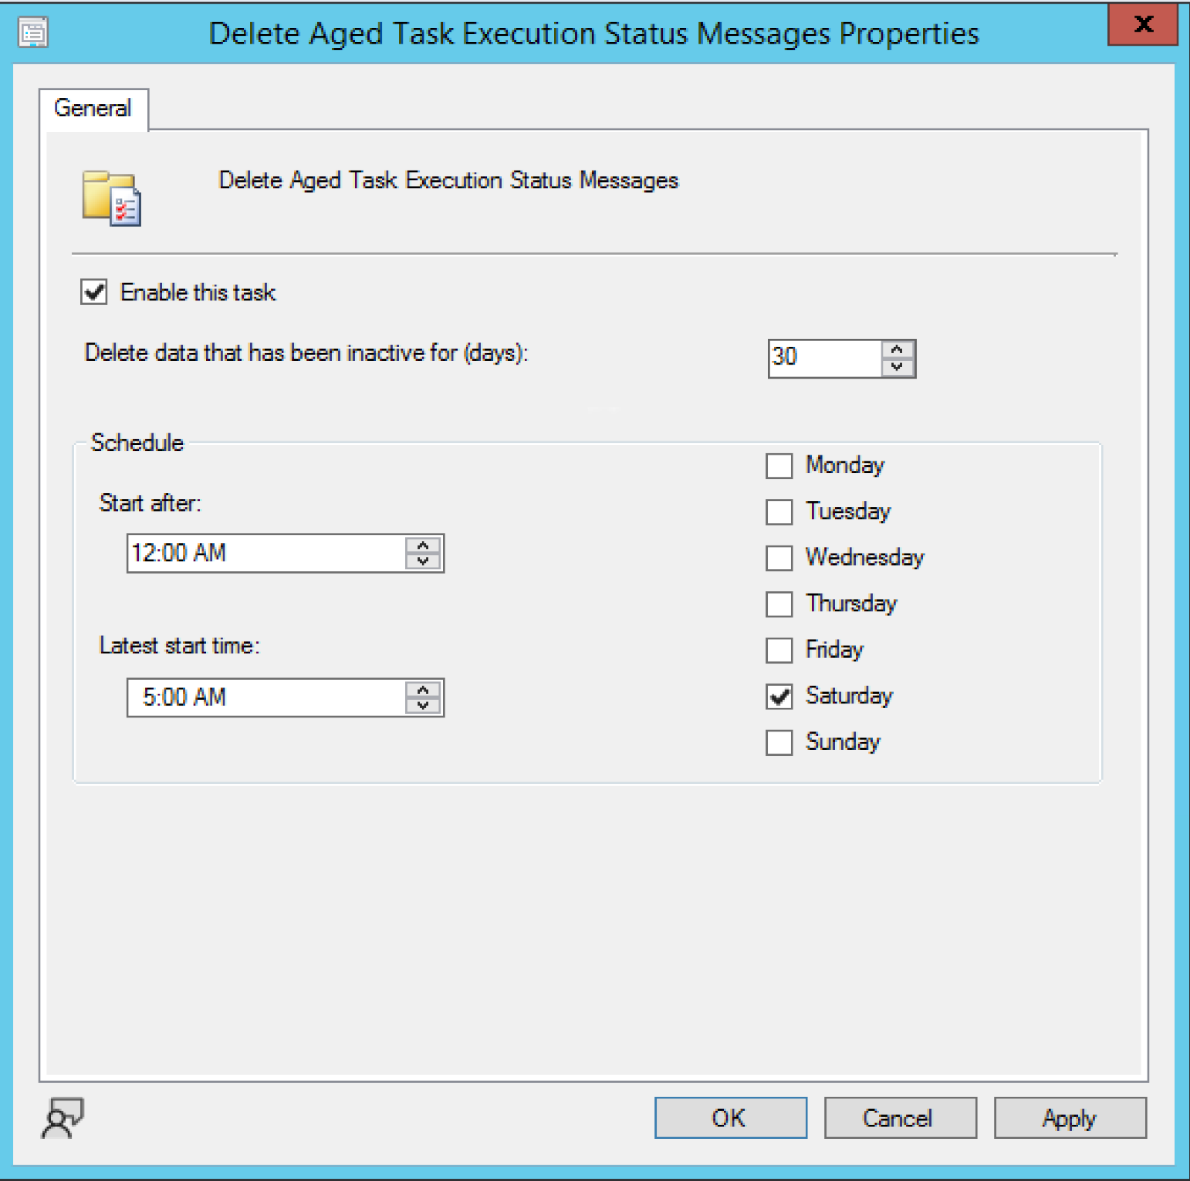 Screenshot of Site Maintenance task “Delete Aged Task Execution Status Messages”.